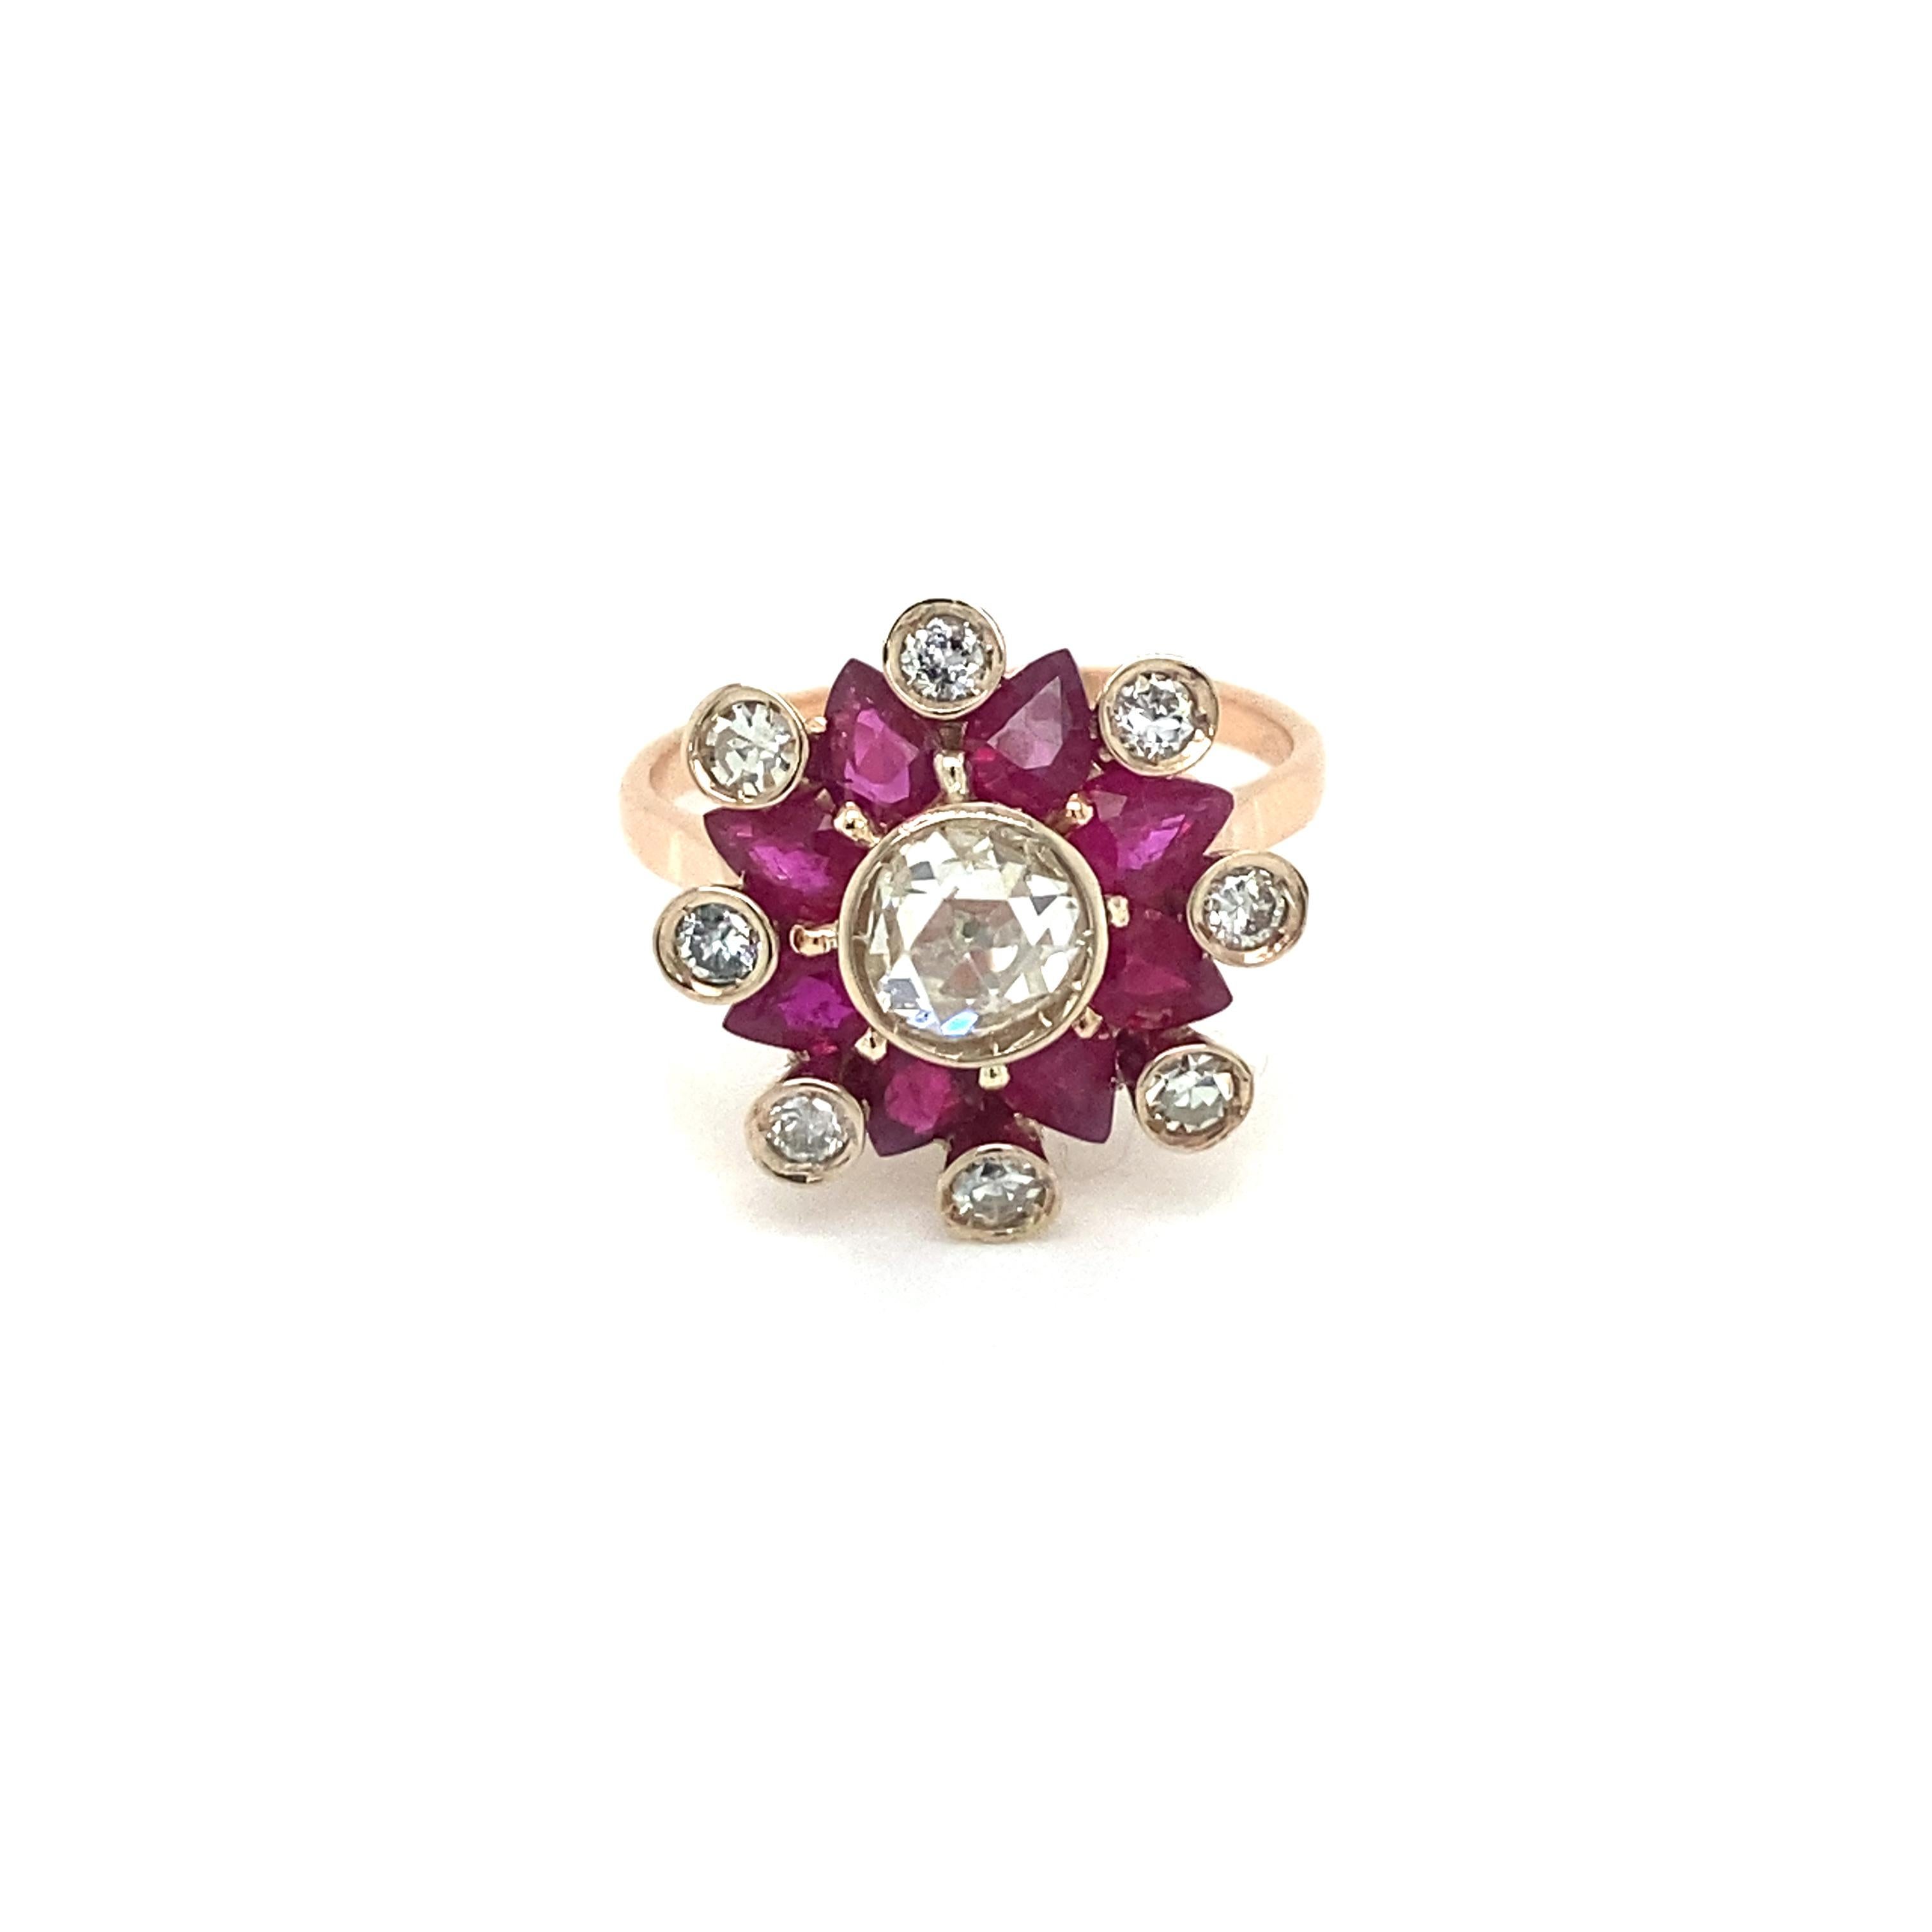 Beautiful 18k rose Gold Cluster Ring centered with a Sparkling Old mine cut Diamond weighing 0,90 carat, graded I color with Vs2 clarity. It is set with a fine Natural Unheated Rubies and diamonds halo,  weighing total 1,50 carats. 
Handmade in